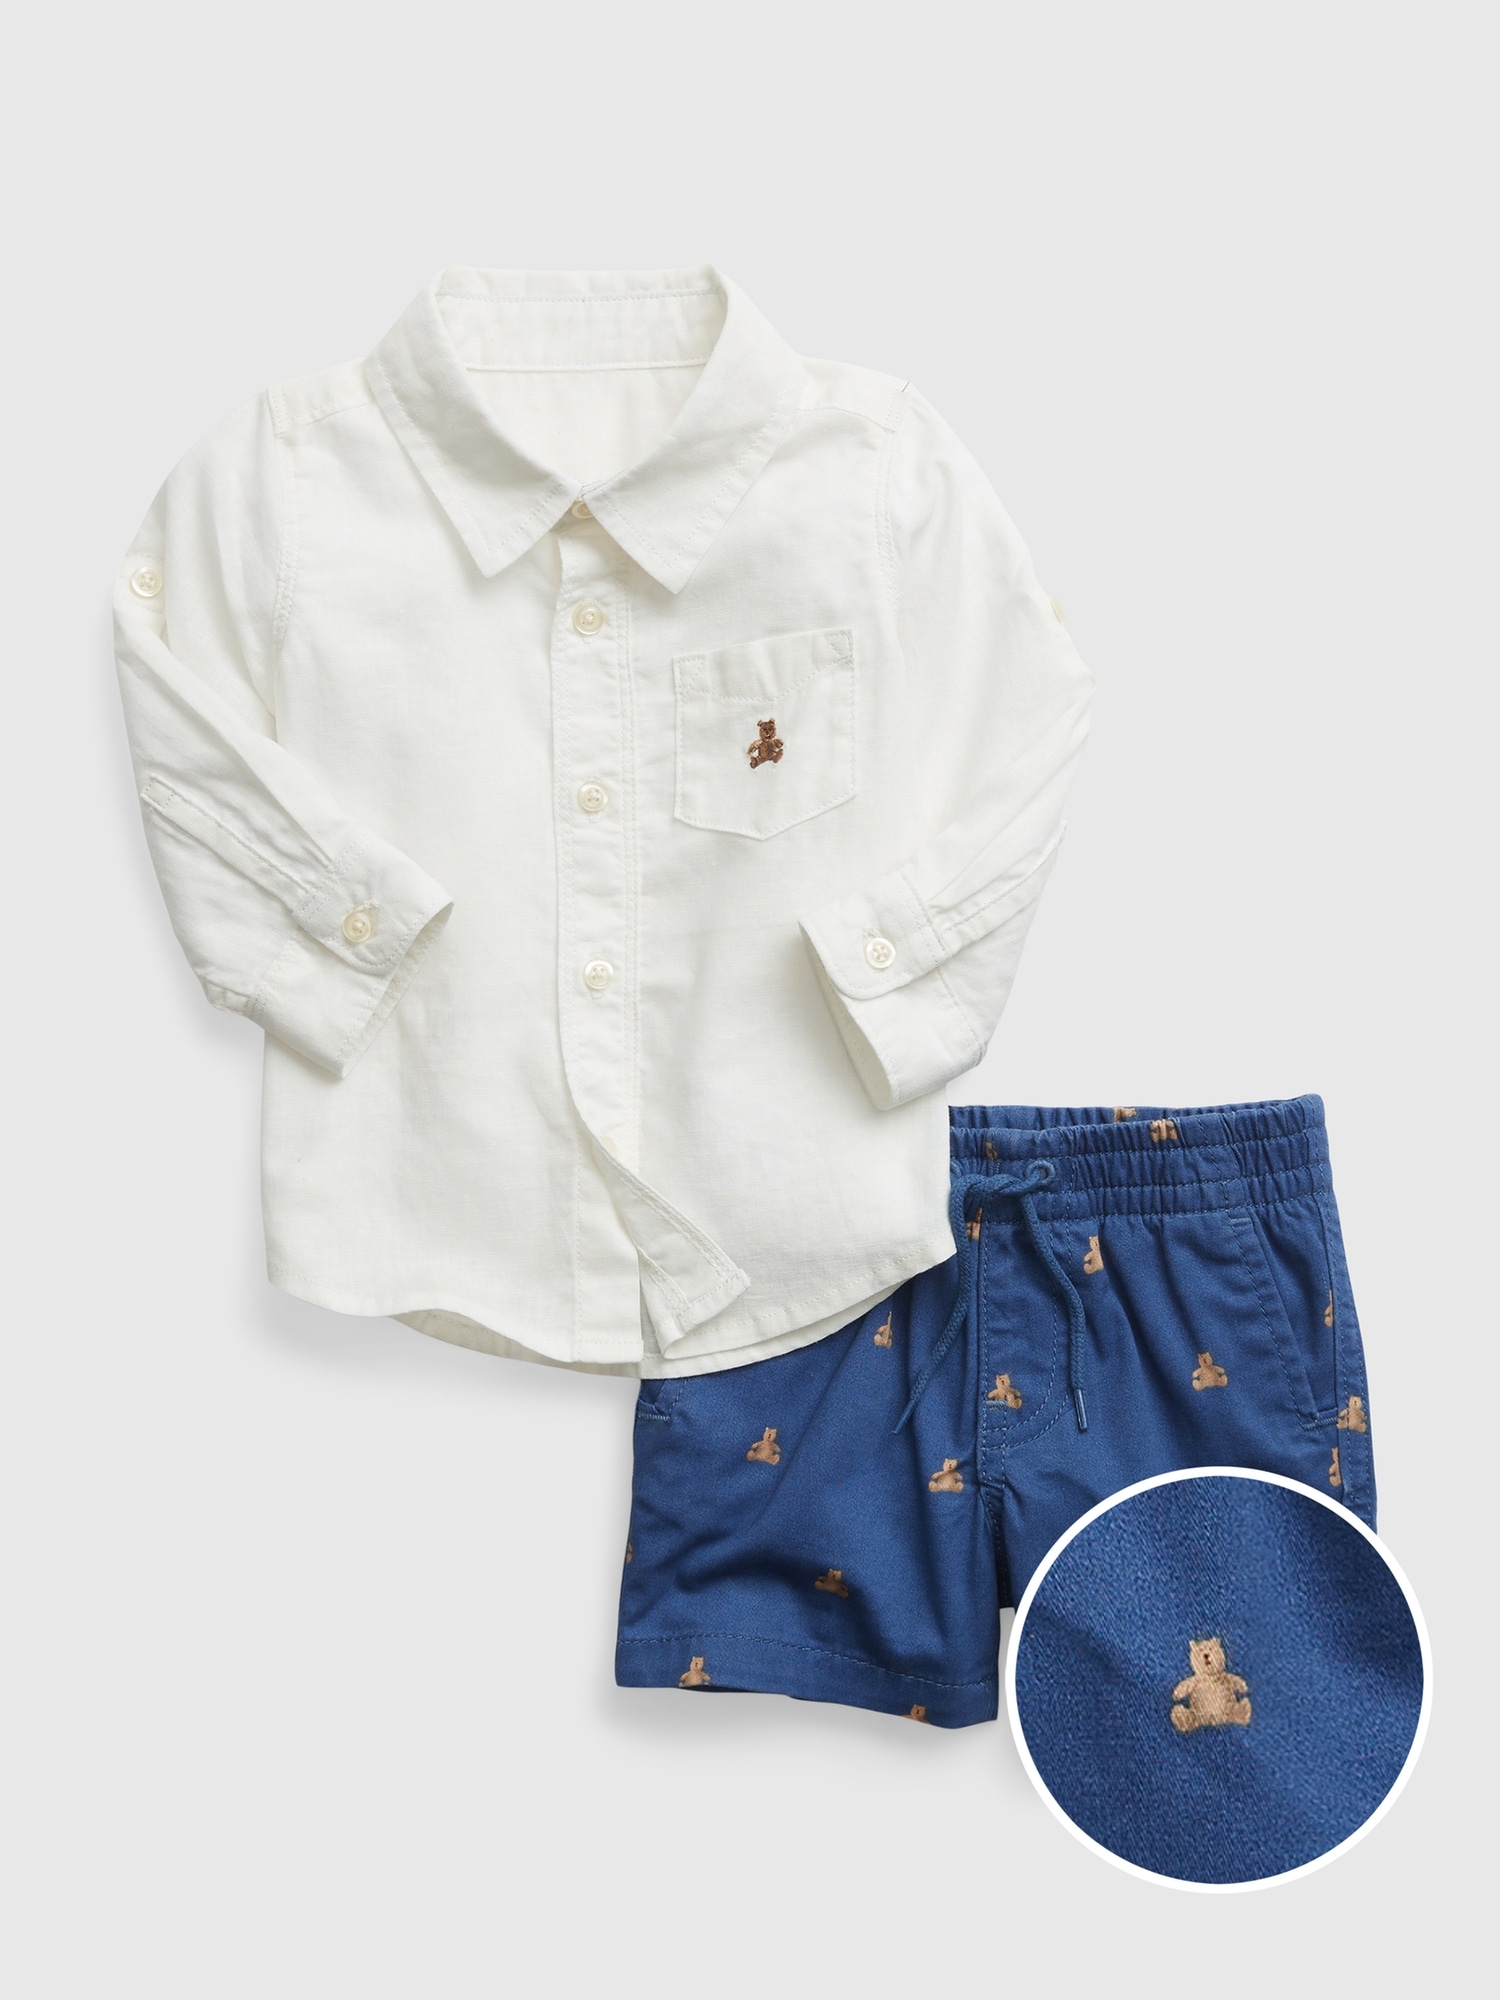 Gap Baby Linen-Cotton Two-Piece Outfit Set white. 1